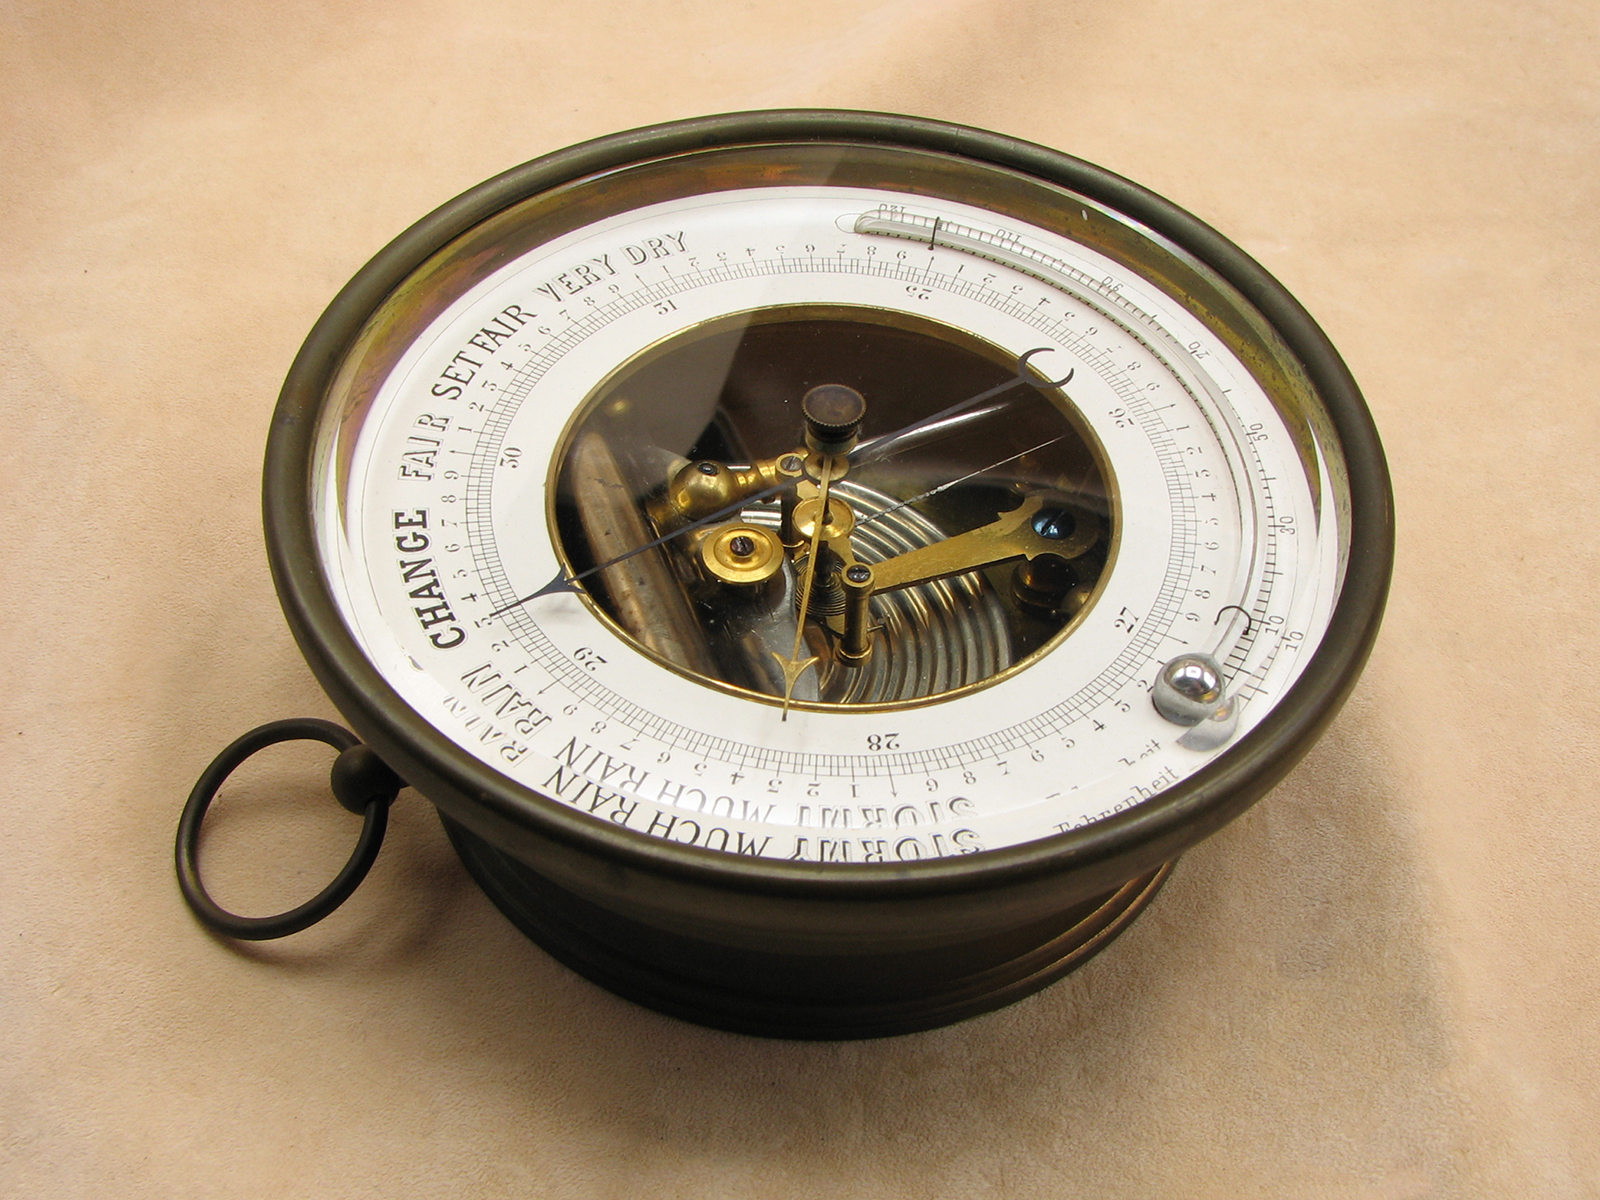 19th century aneroid barometer with curved thermometer